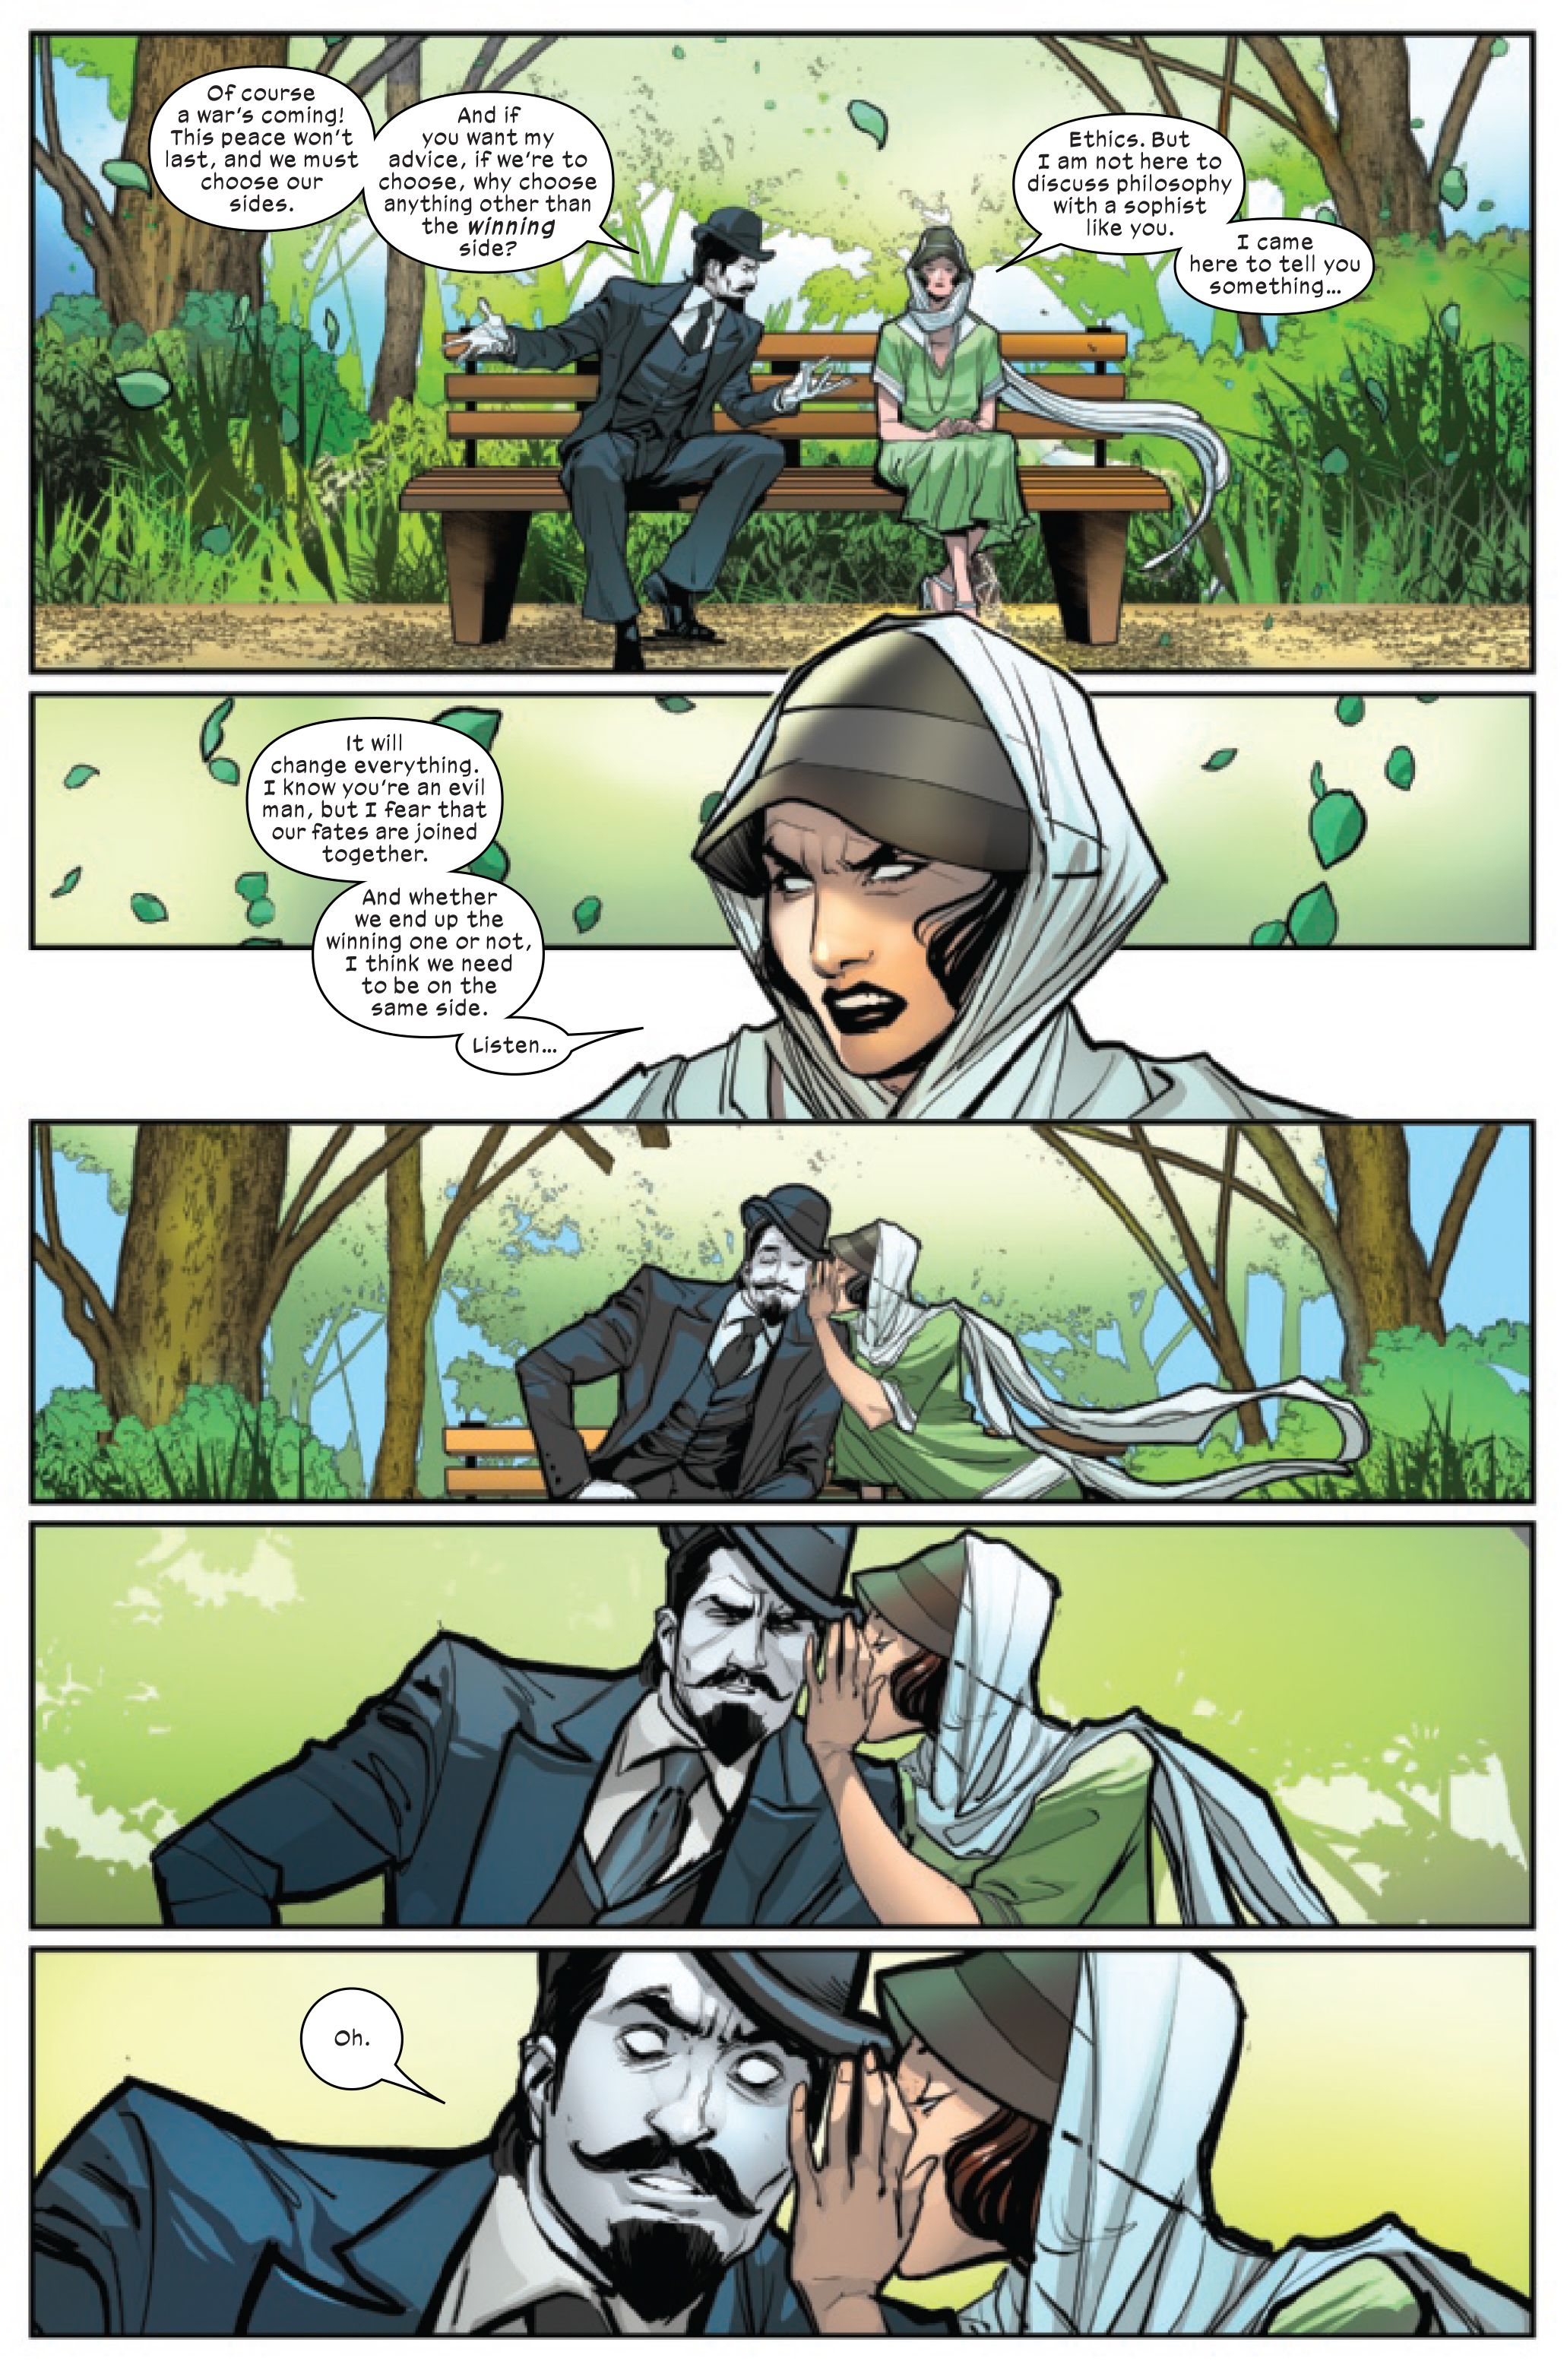 Mister Sinister and Irene Adler/Destiny talk in Immortal X-Men #1, by Kieron Gillen and Lucas Werneck. (Page 3)